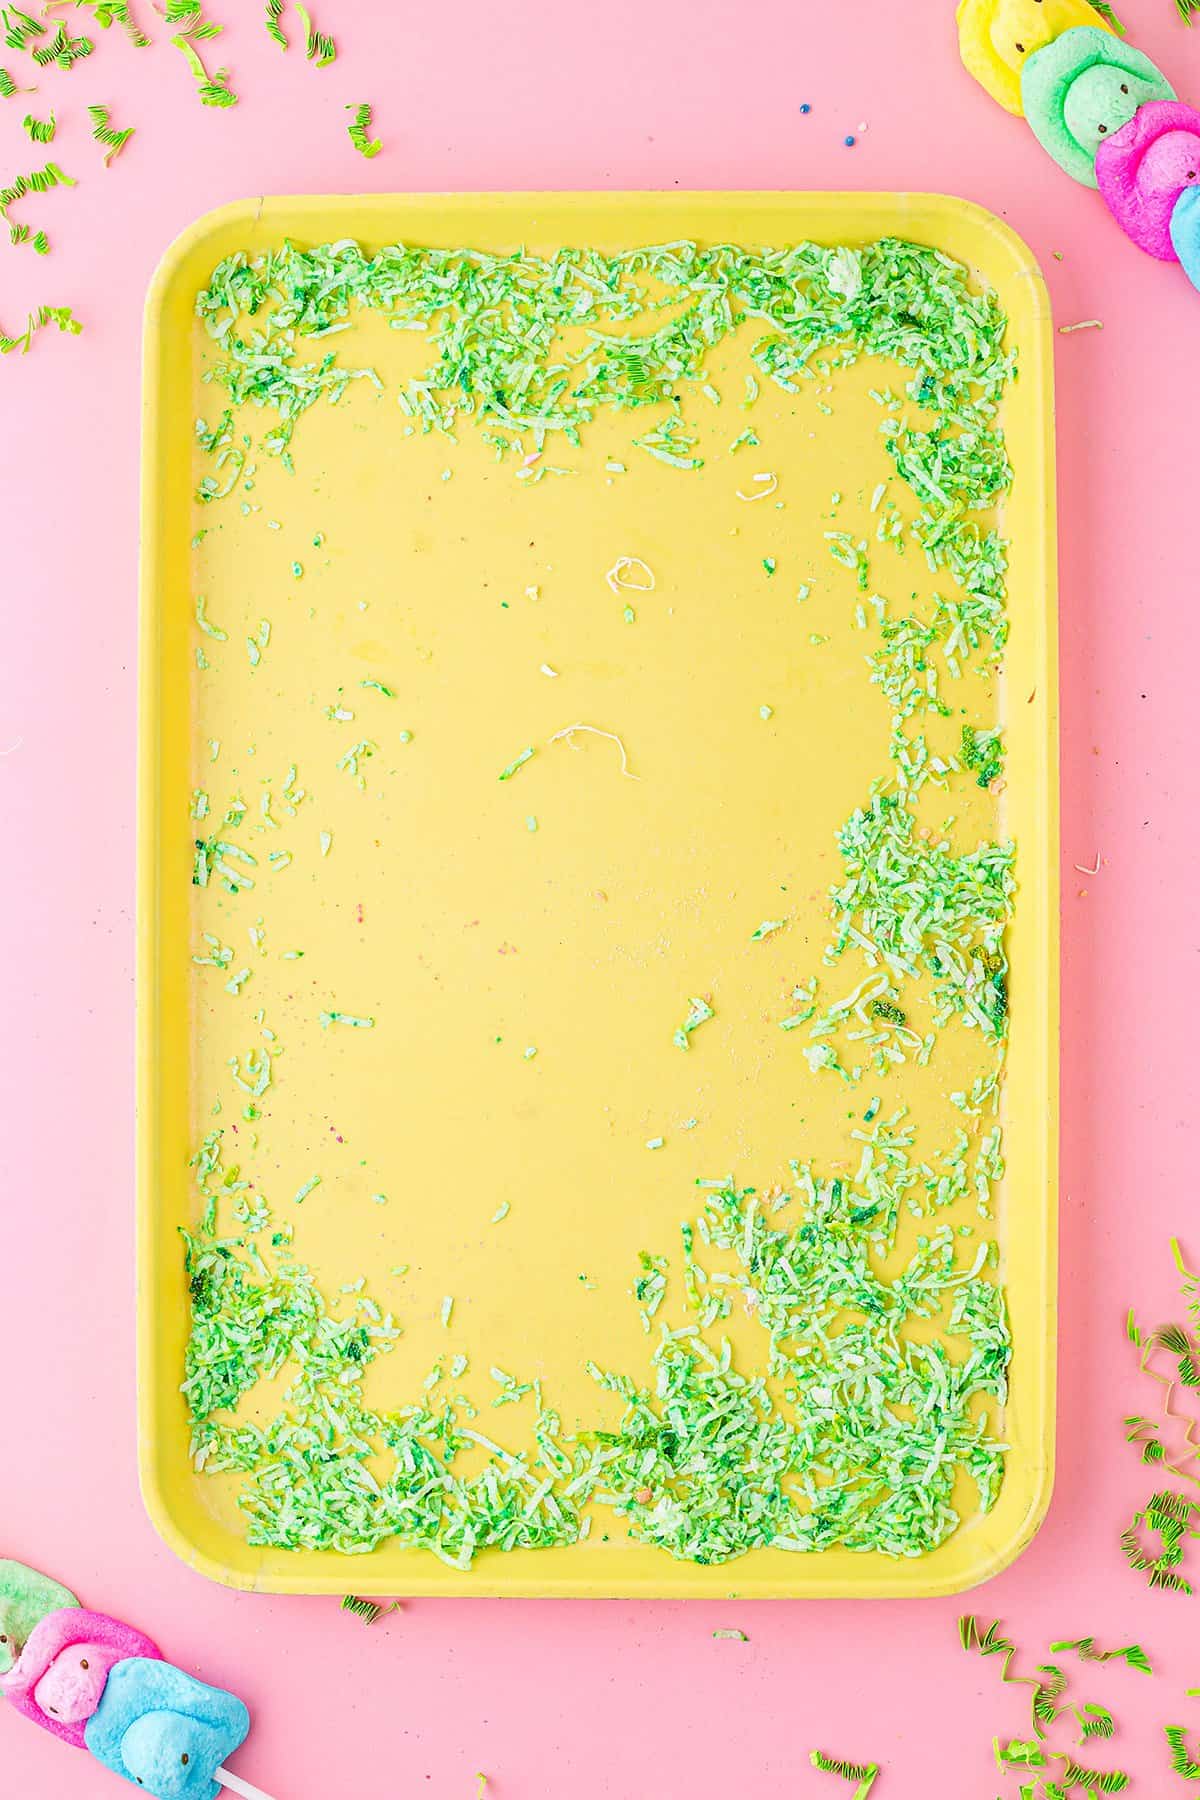 green coconut shreds on yellow board.